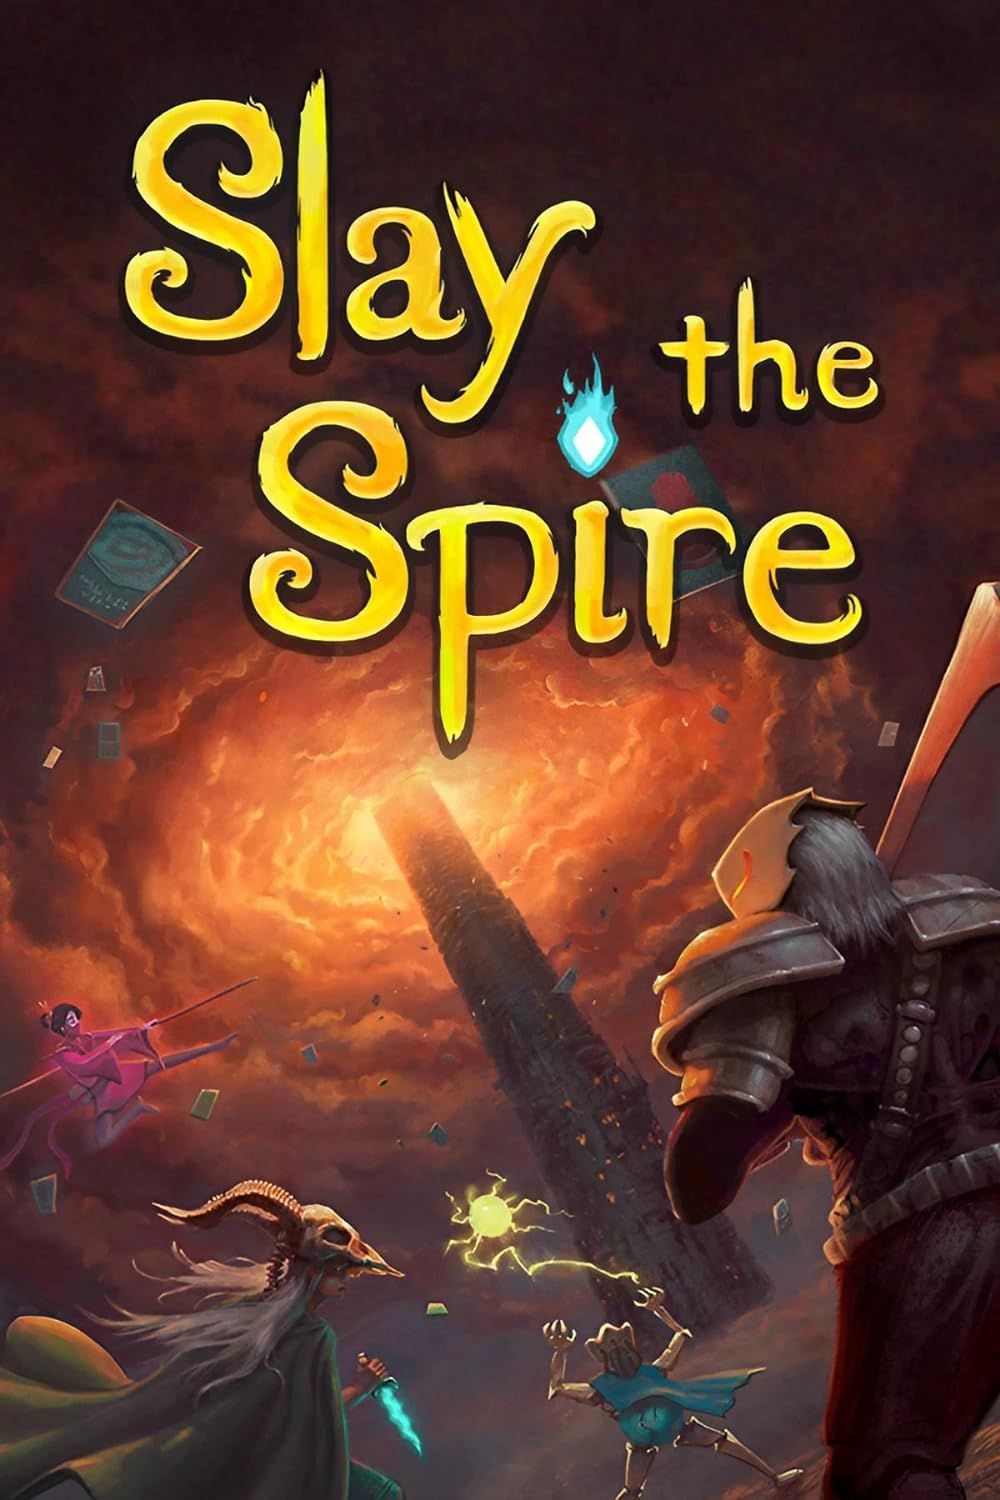 Slay The Spire video game poster